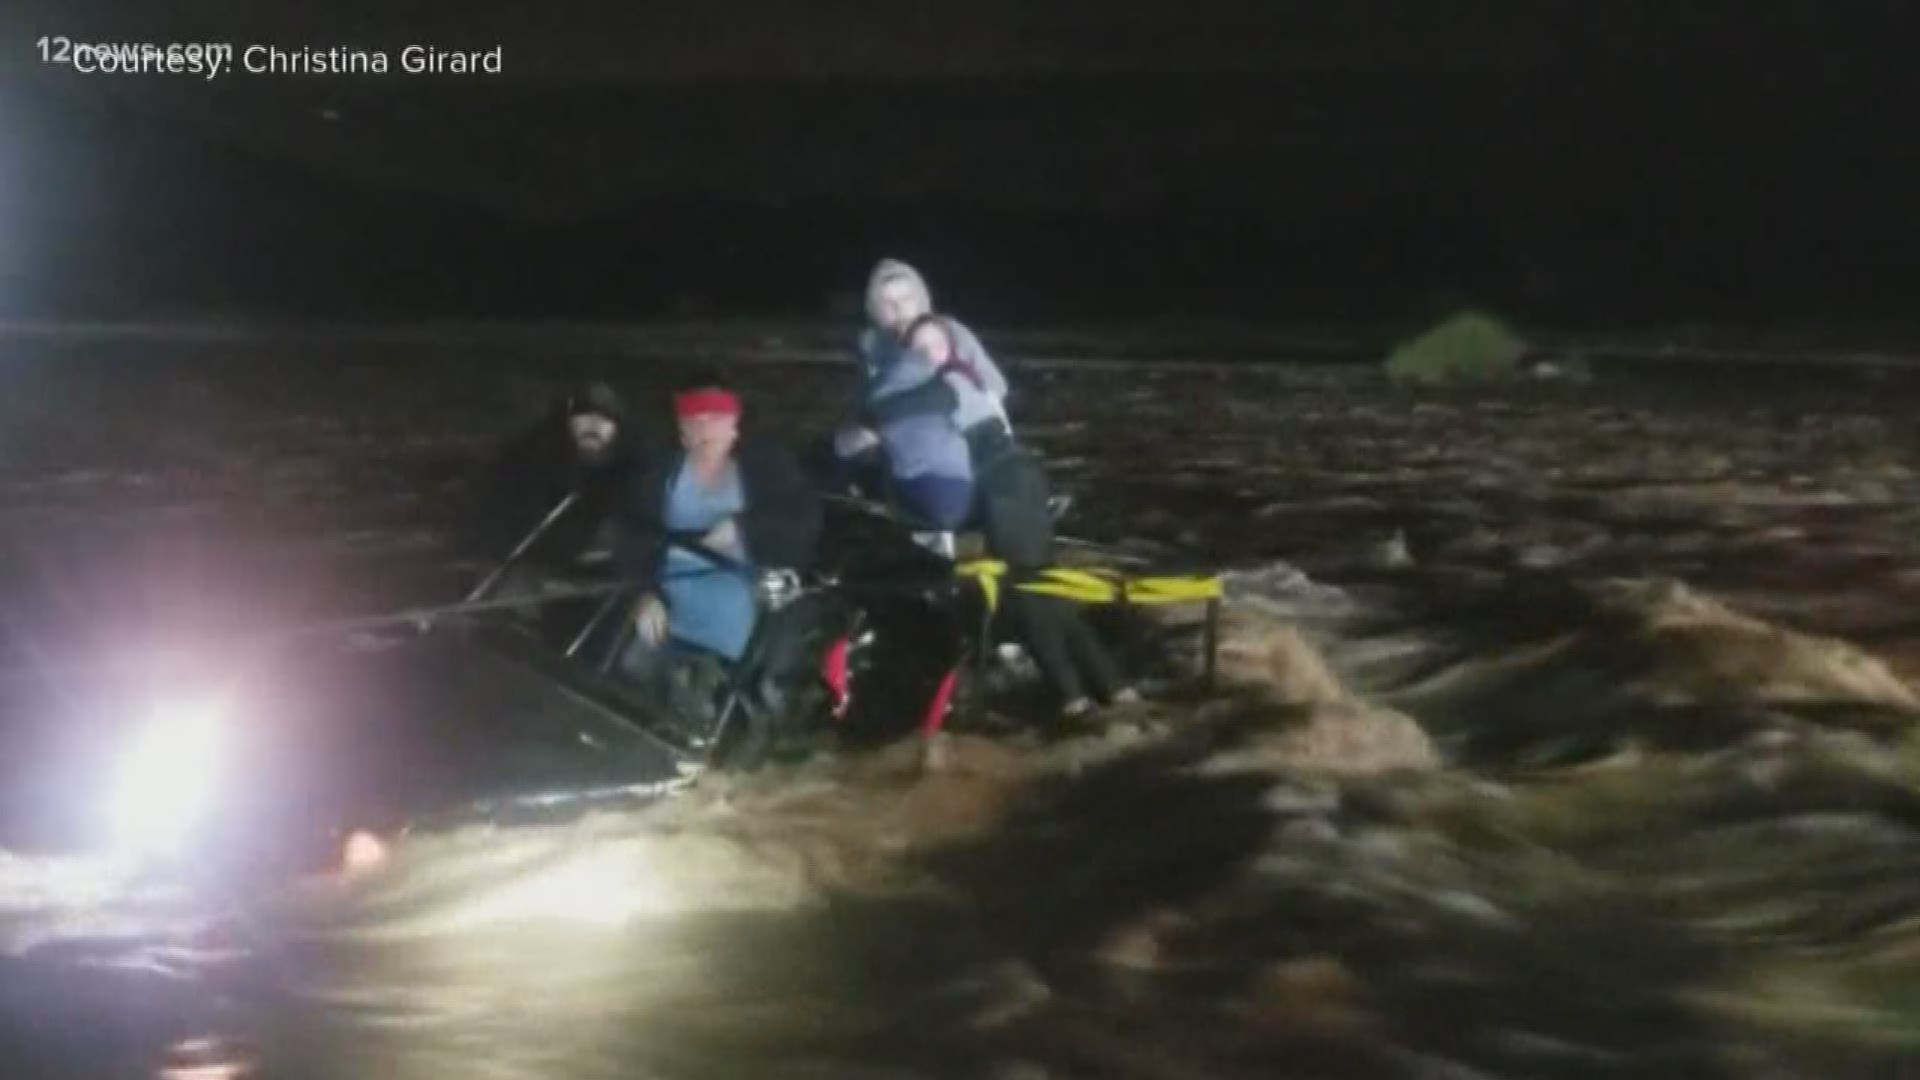 Tonto Creek is one of the most dangerous locations but video from nearby Sycamore Creek on Saturday night shows a family being pulled to safety.